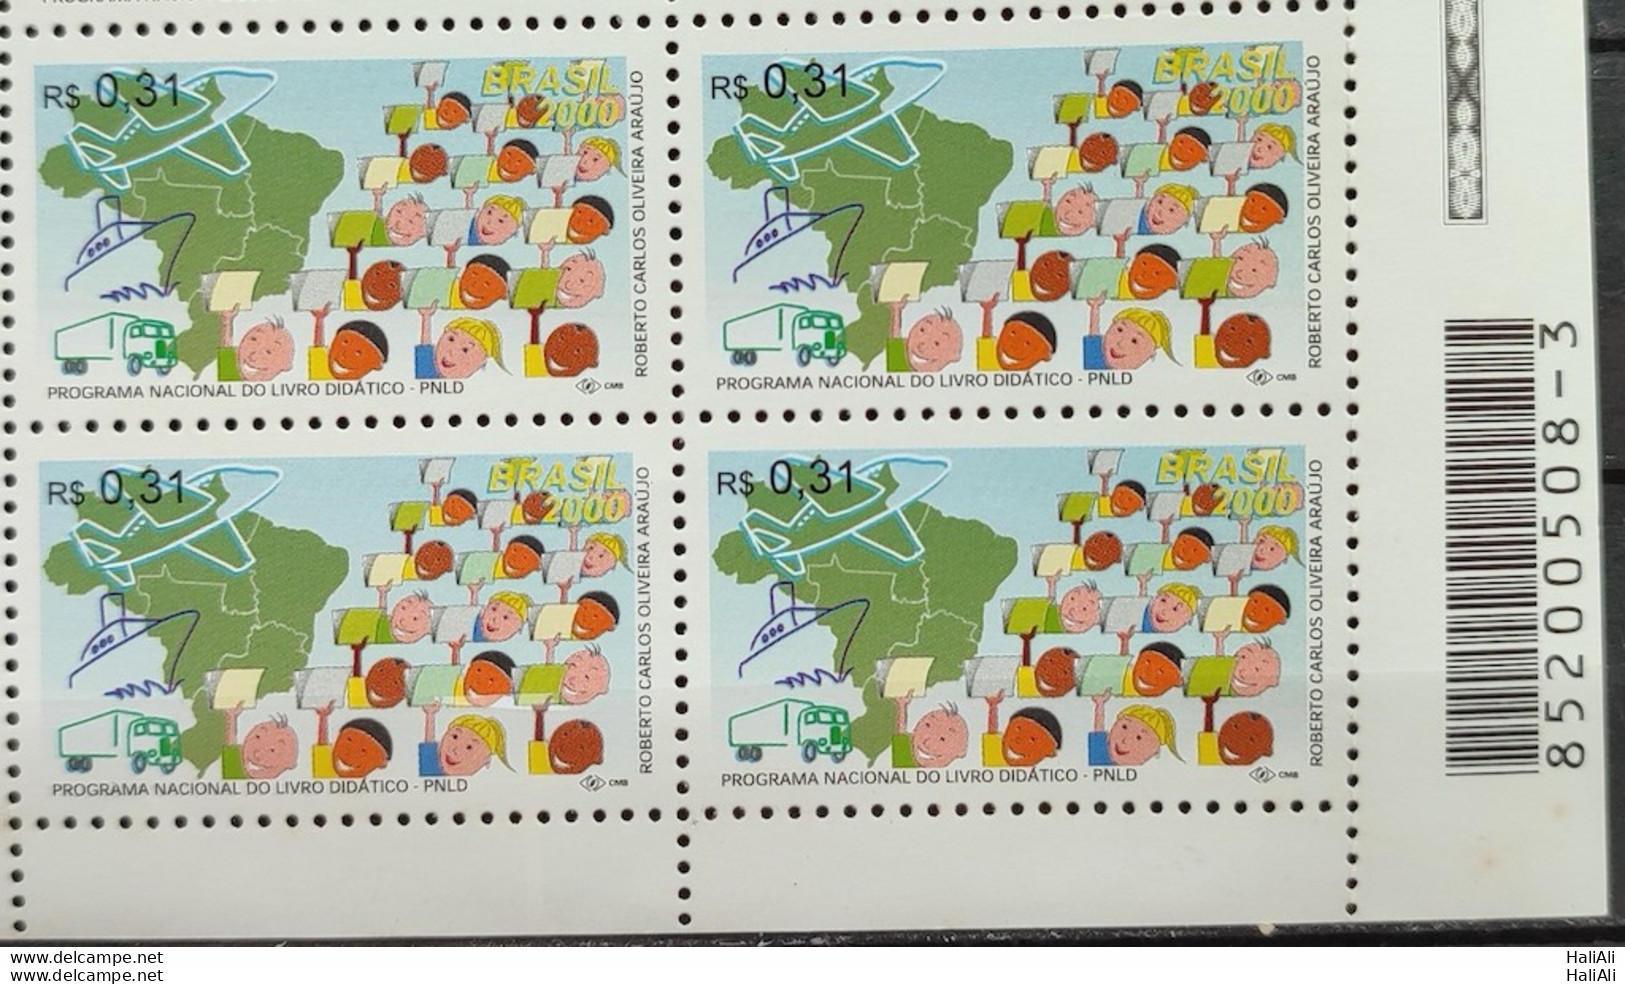 C 2242 Brazil Stamp National Book Didactic Program Education Map 2000 Block Of 4 Bar Code - Unused Stamps